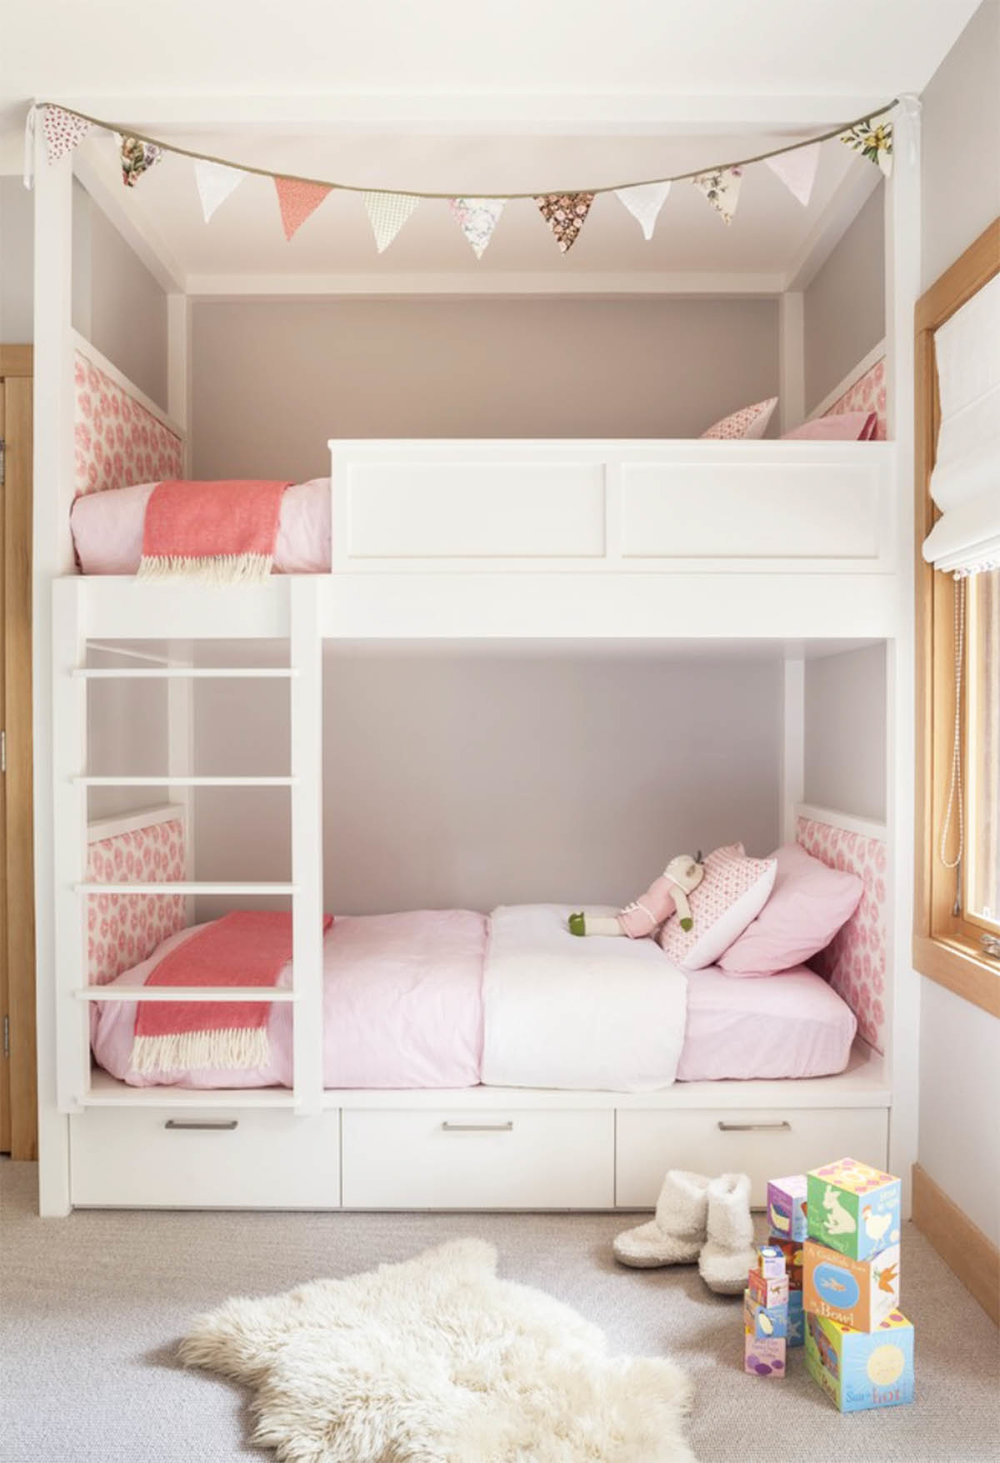 Shared Kids Rooms With Bunk Beds, Kids Room Bunk Bed